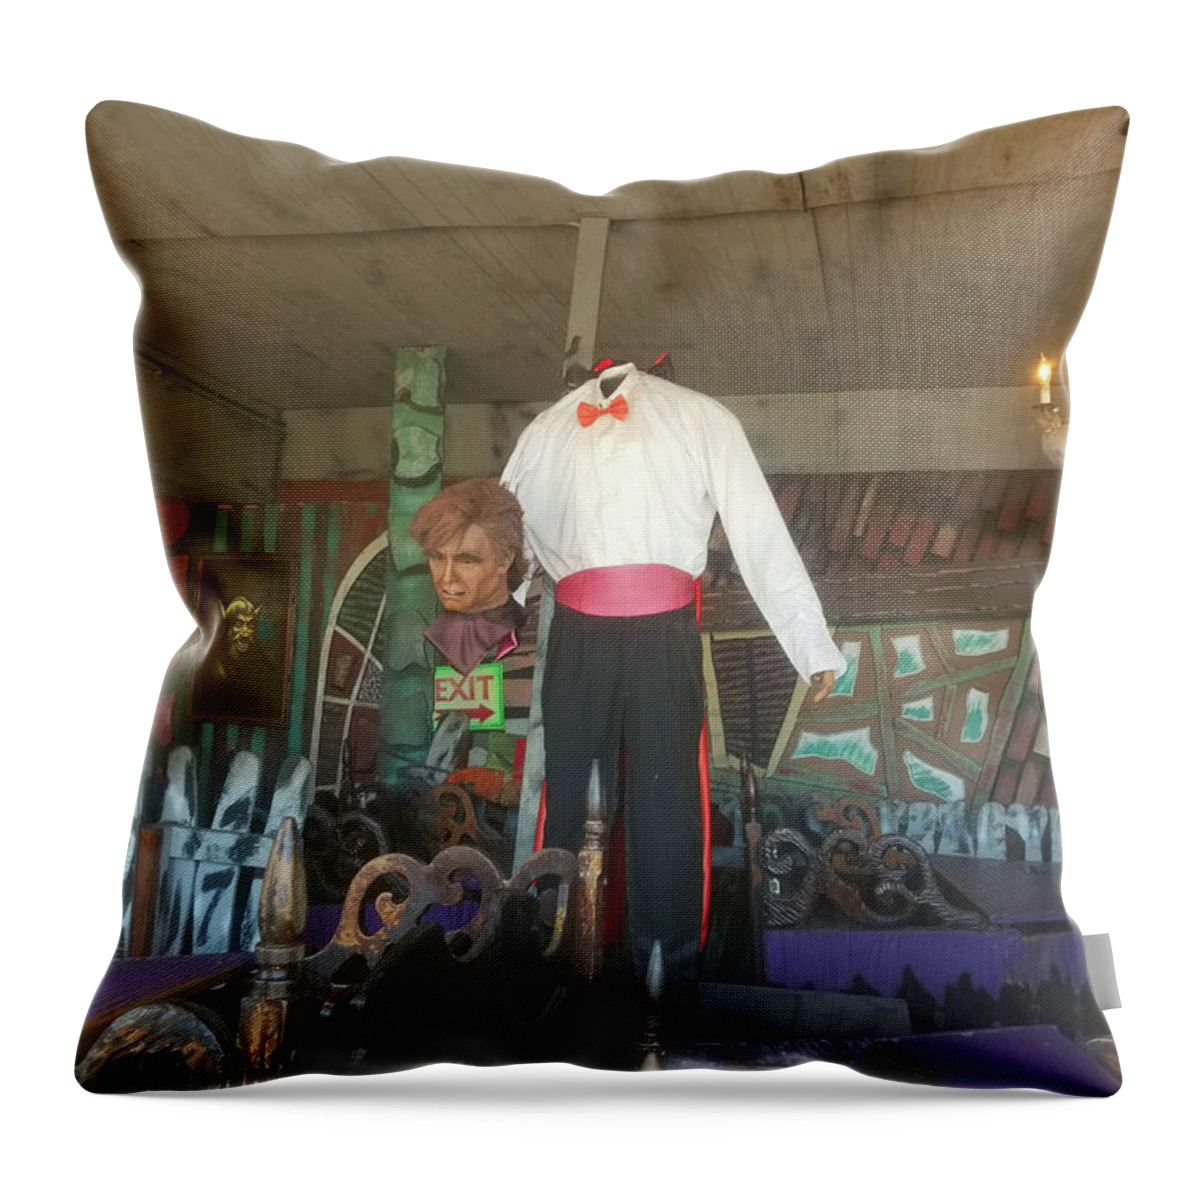 Trimpers Throw Pillow featuring the photograph Haunted House Headless Man by Robert Banach